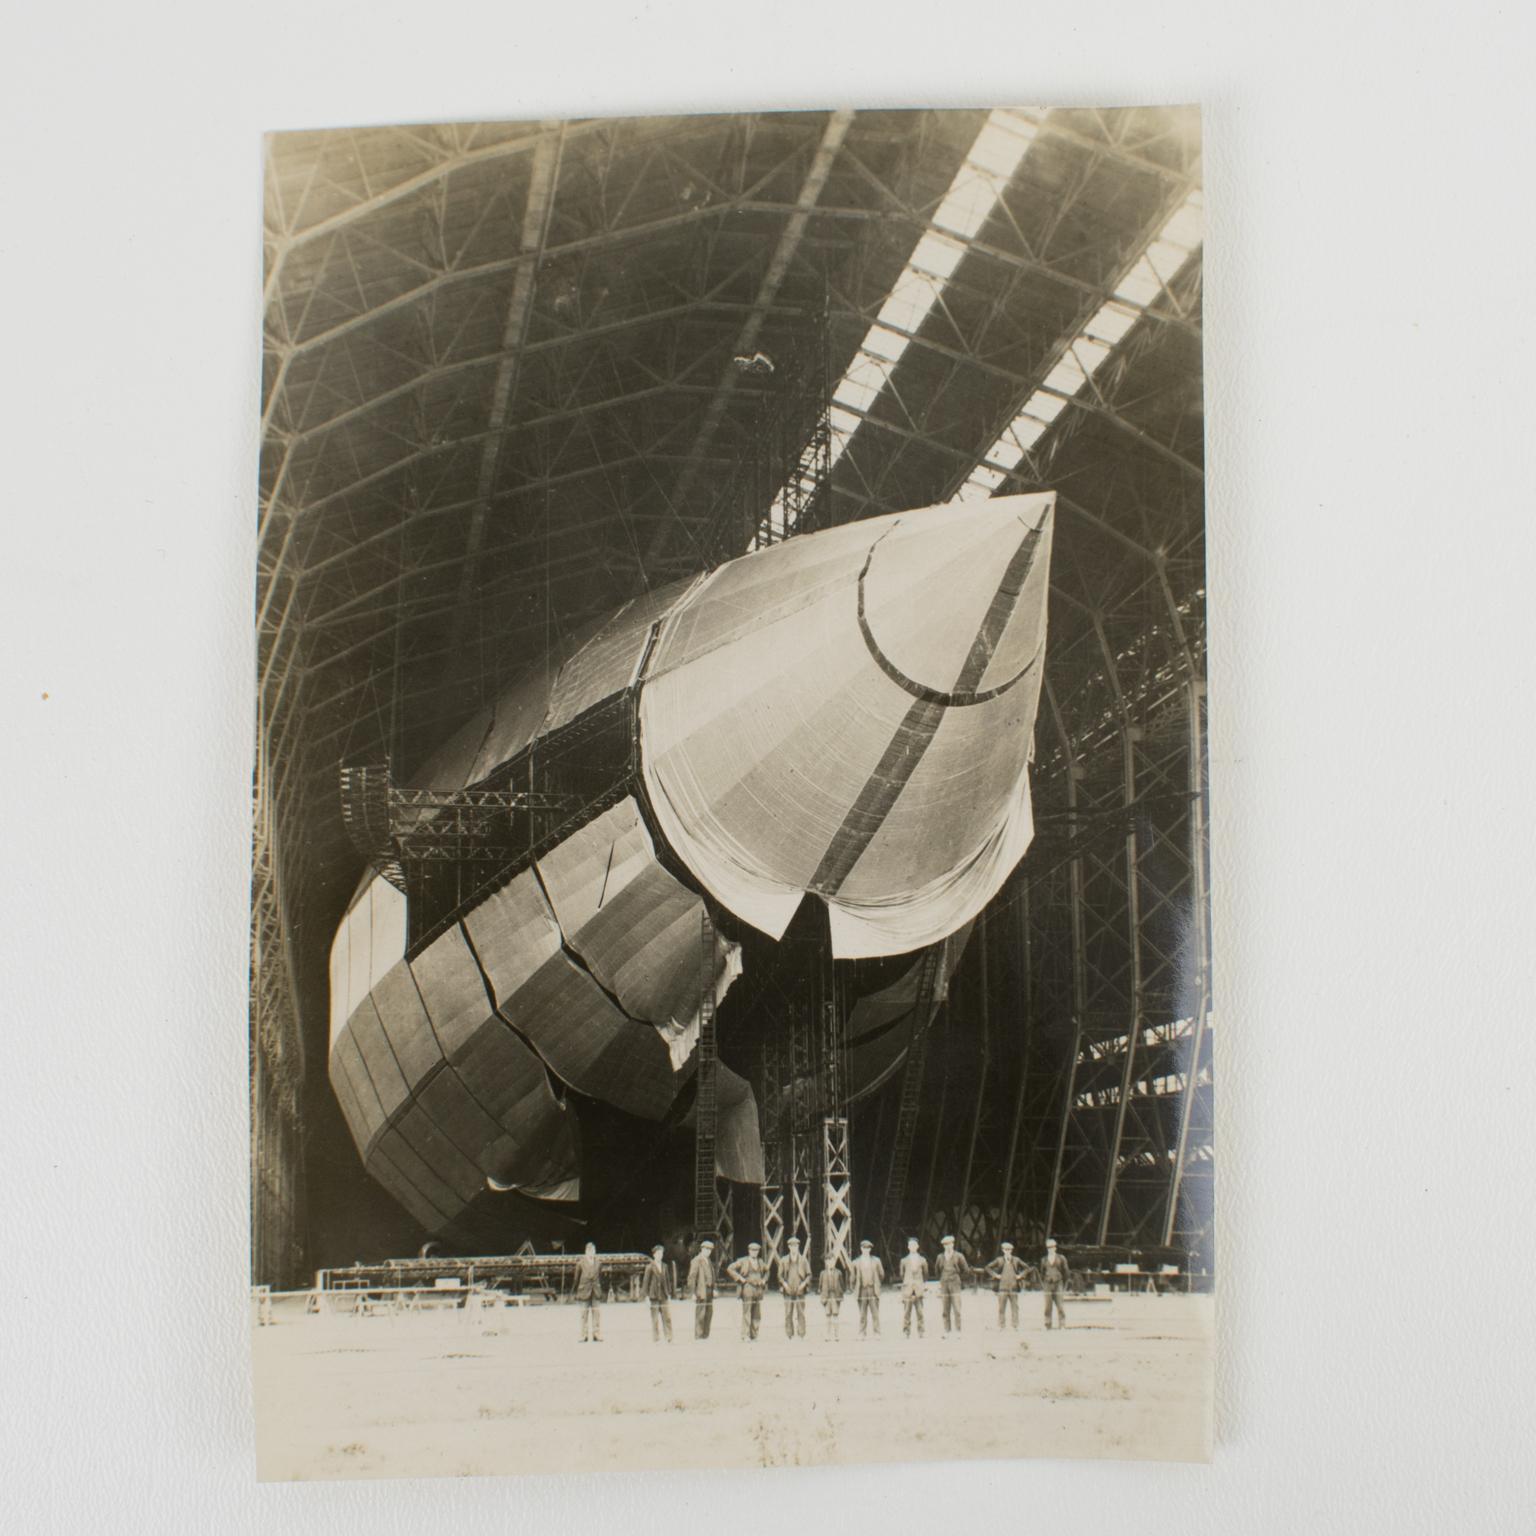 An original silver gelatin black and white photography by Wide World Photos - New York Times Paris, Airship R100 in construction, circa 1929. Note the people in the foreground of the photograph gives a little idea of ​​the airship's